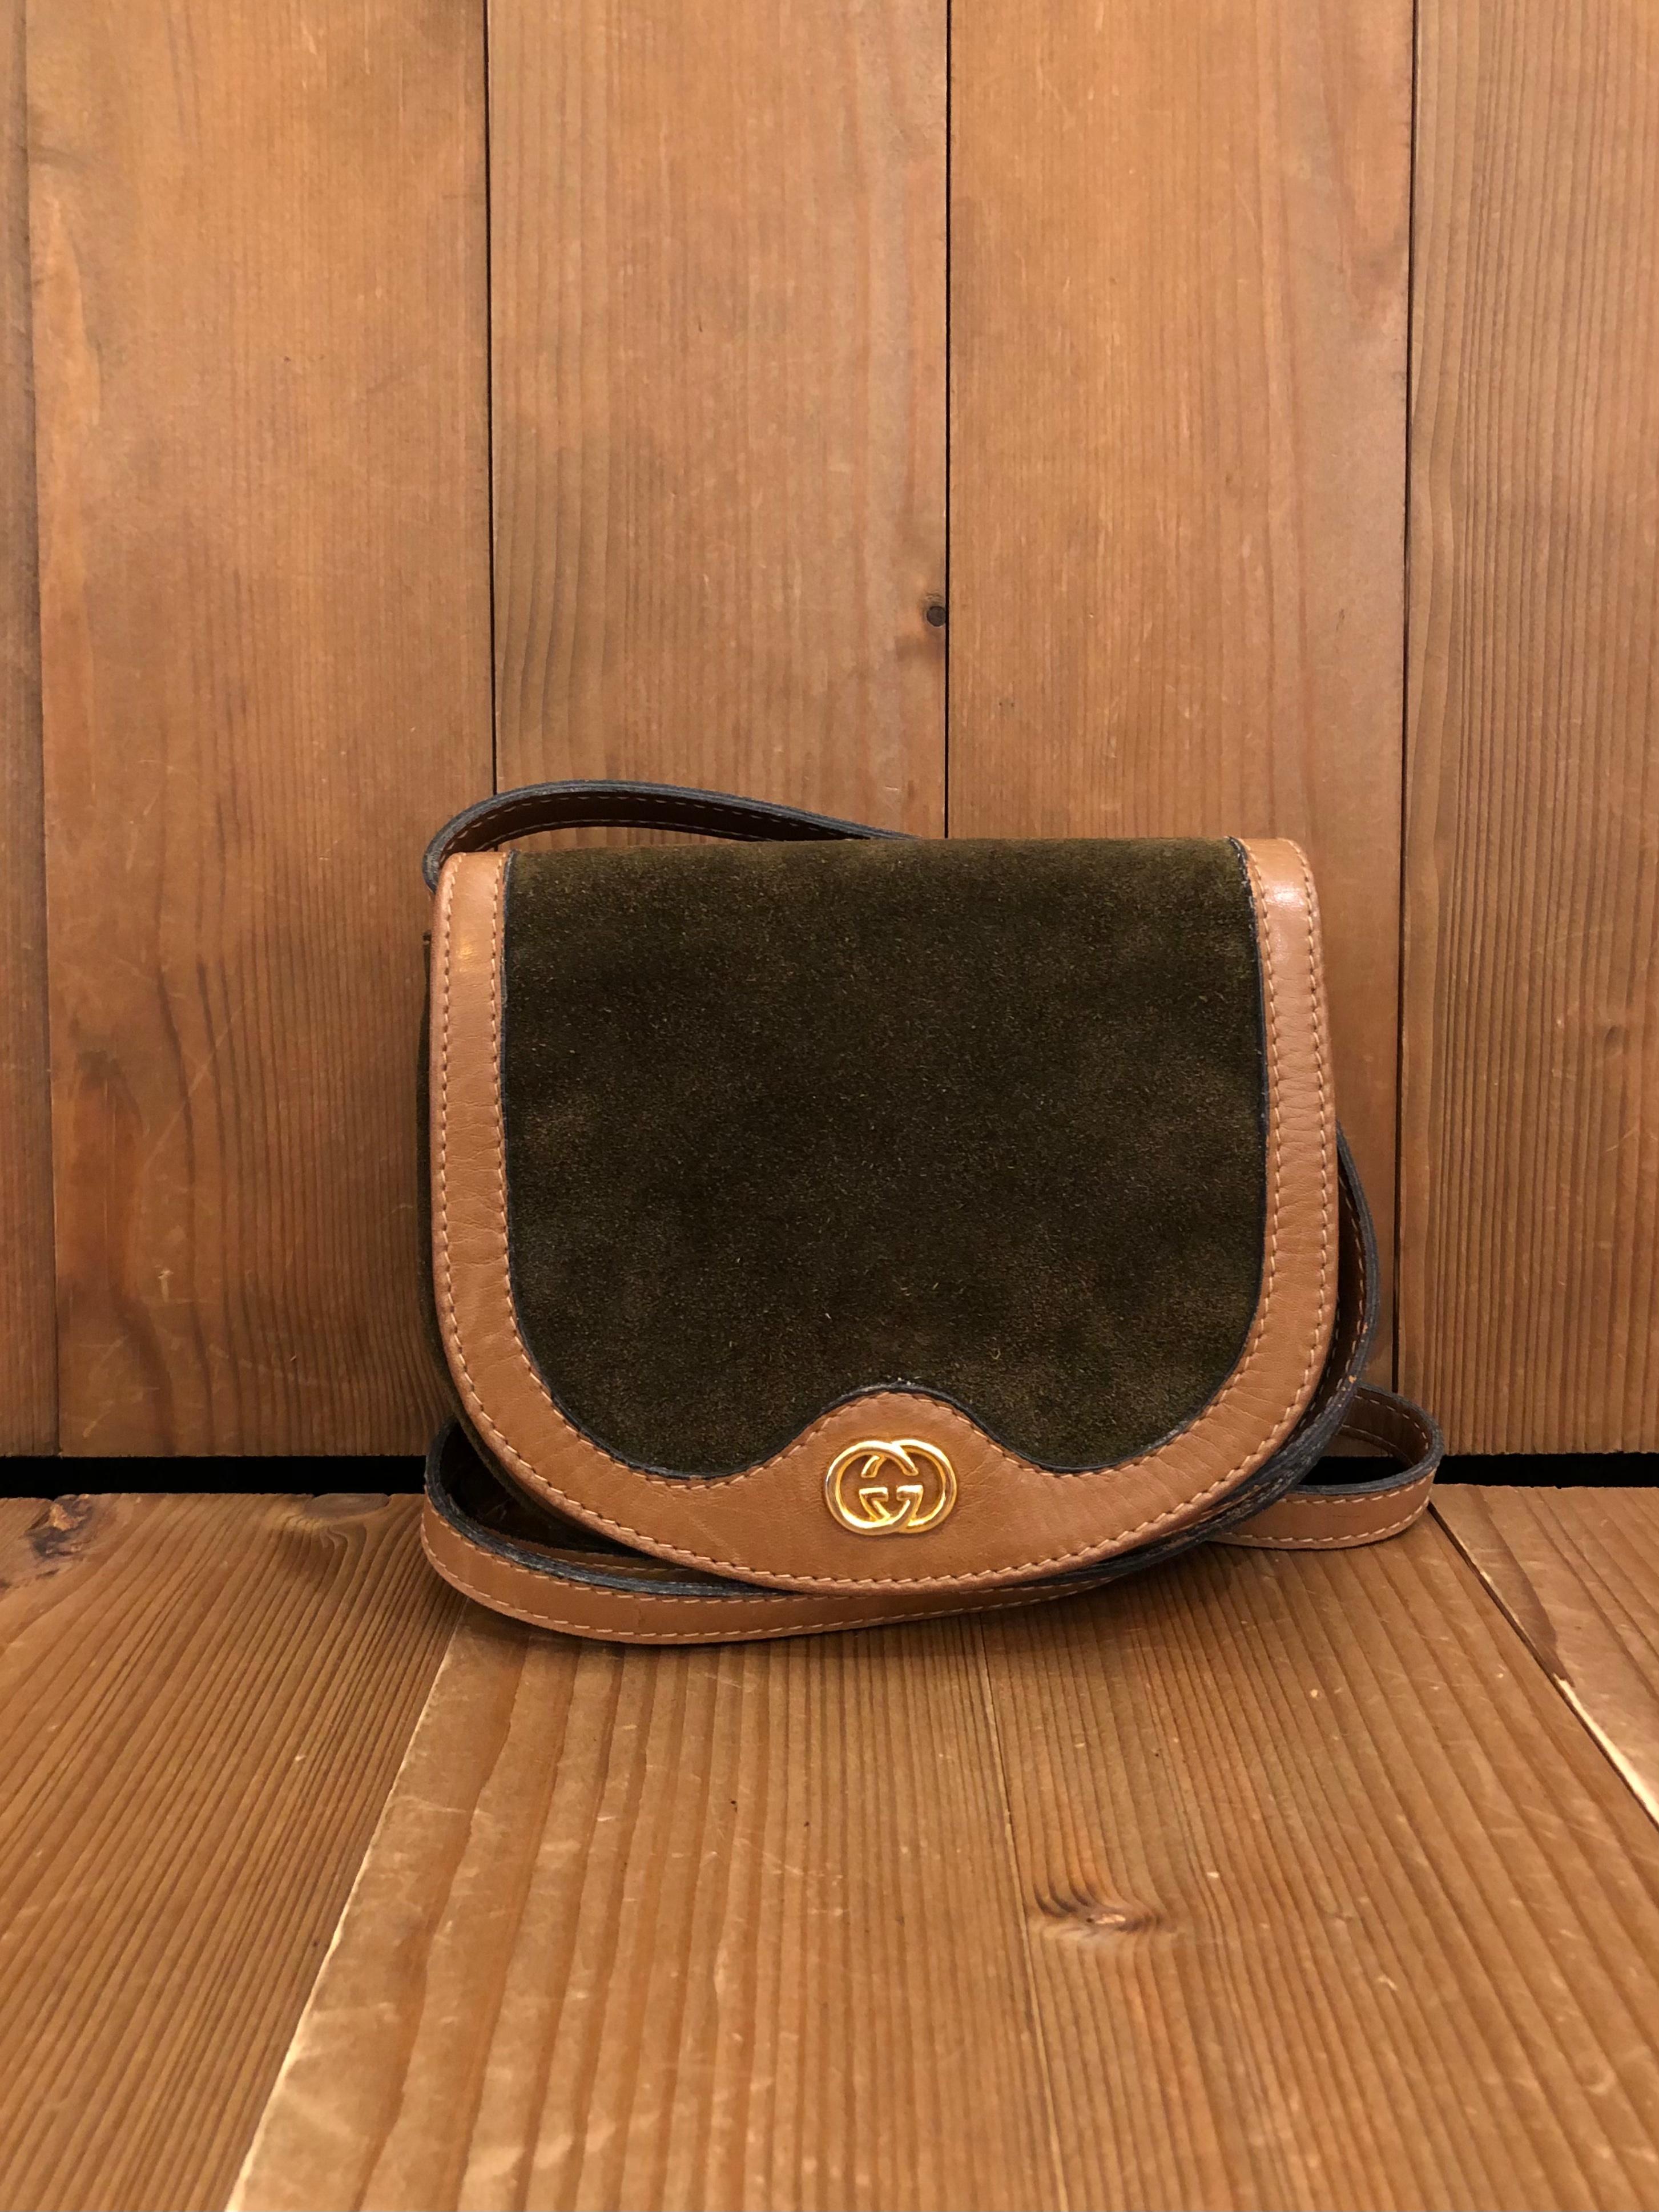 This vintage GUCCI mini crossbody bag is crafted of suede and calf leather in brown featuring gold toned hardware. Font flap snap closure opens to Gucci’s diamanté jacquard interior in brown. Made in Italy. Measures approximately 6.5 x 5.5 x 1.25